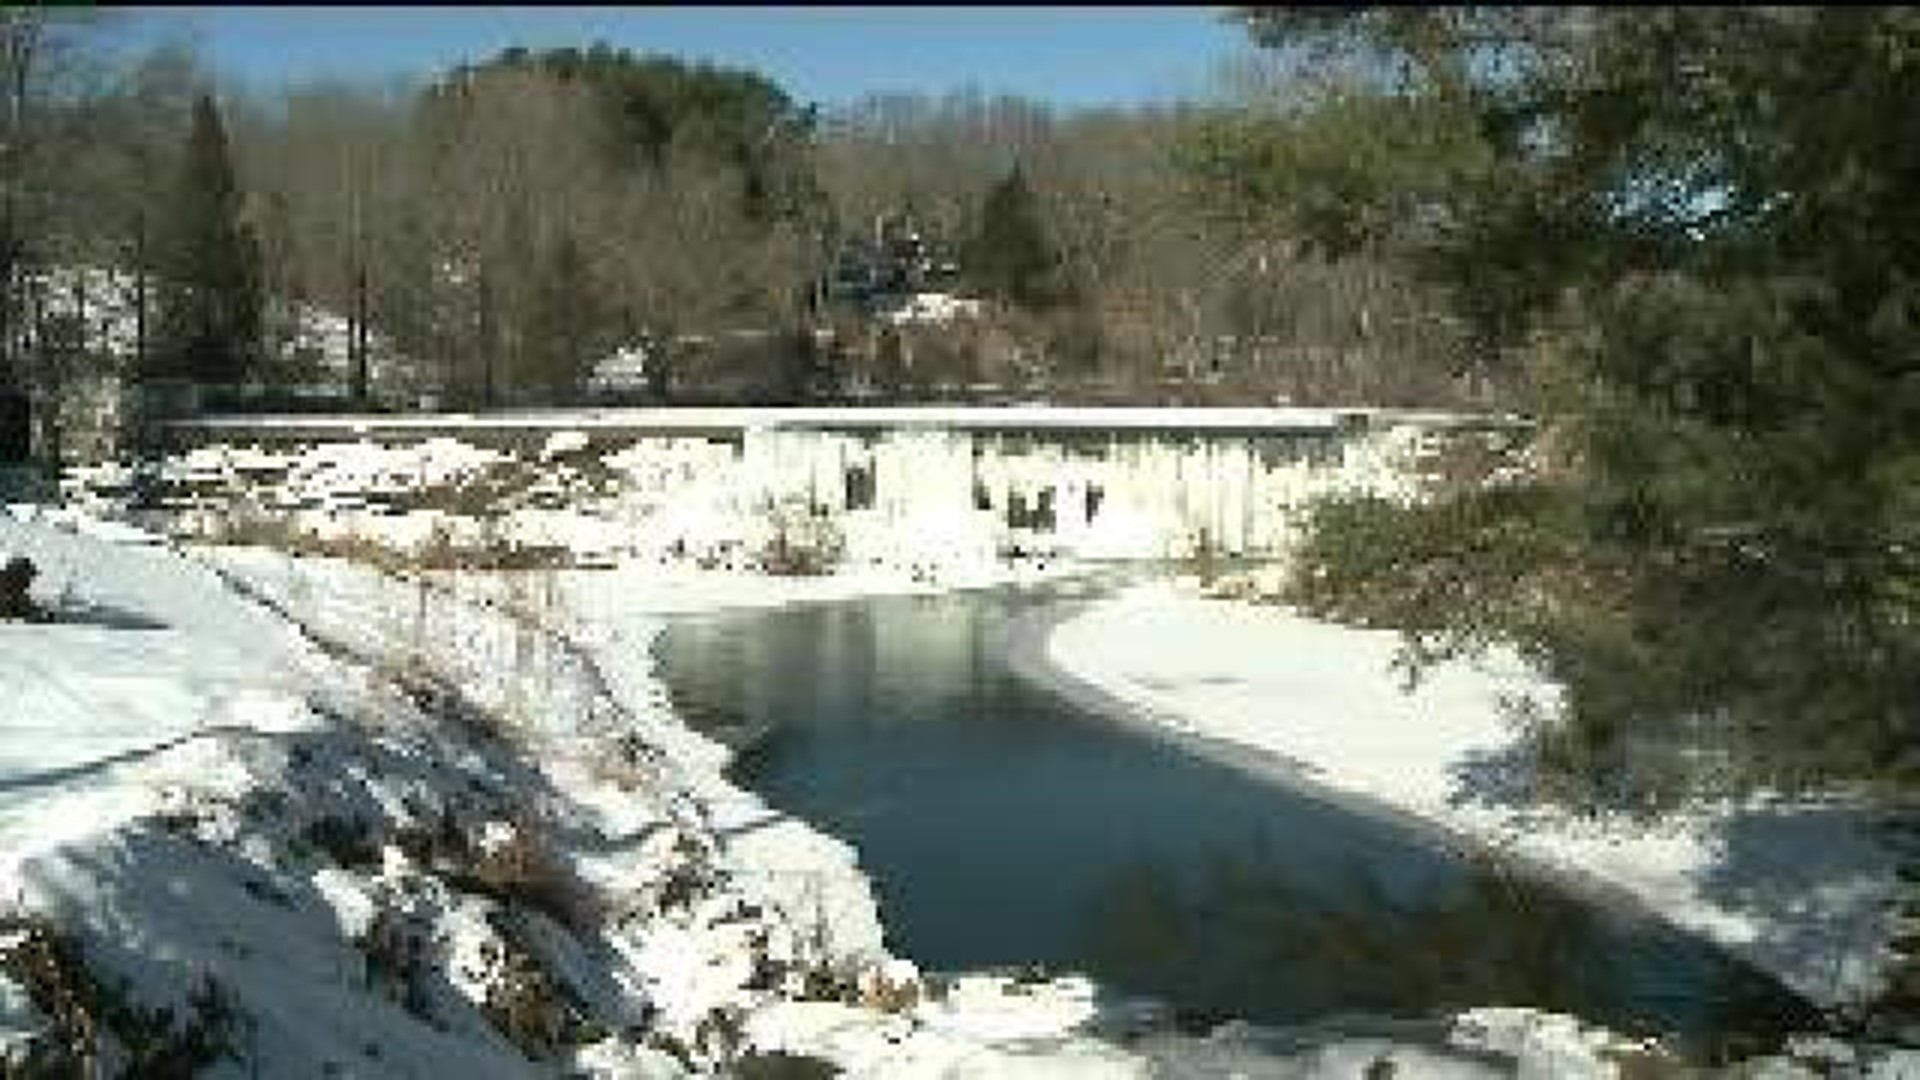 Neighbors Upset by Plans to Drain Pond